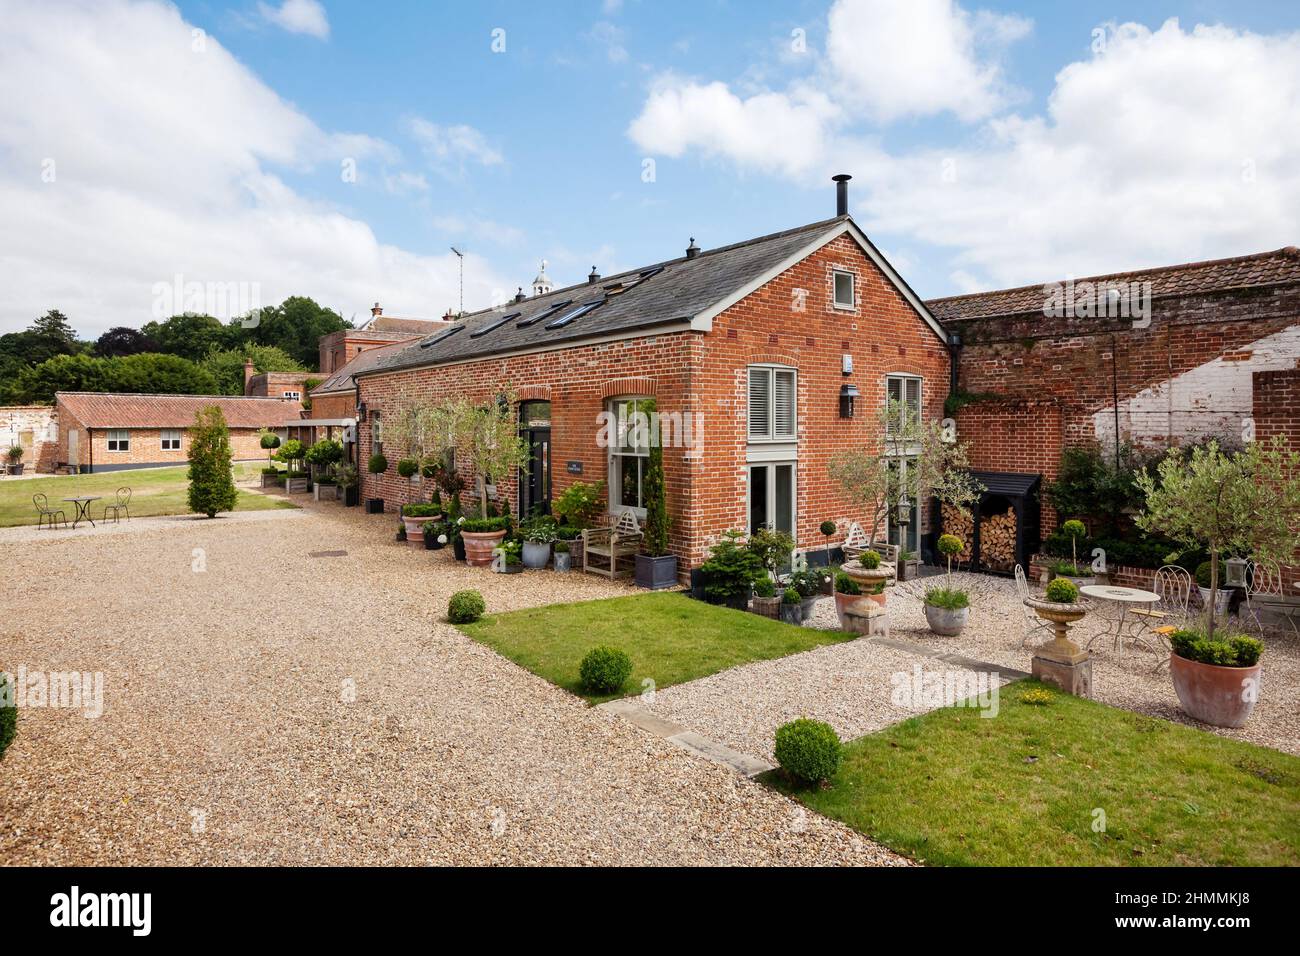 Newport, Essex - July 10 2018: Old farm outbuilding converted into luxurious countryside home within charming landscaped gardens Stock Photo